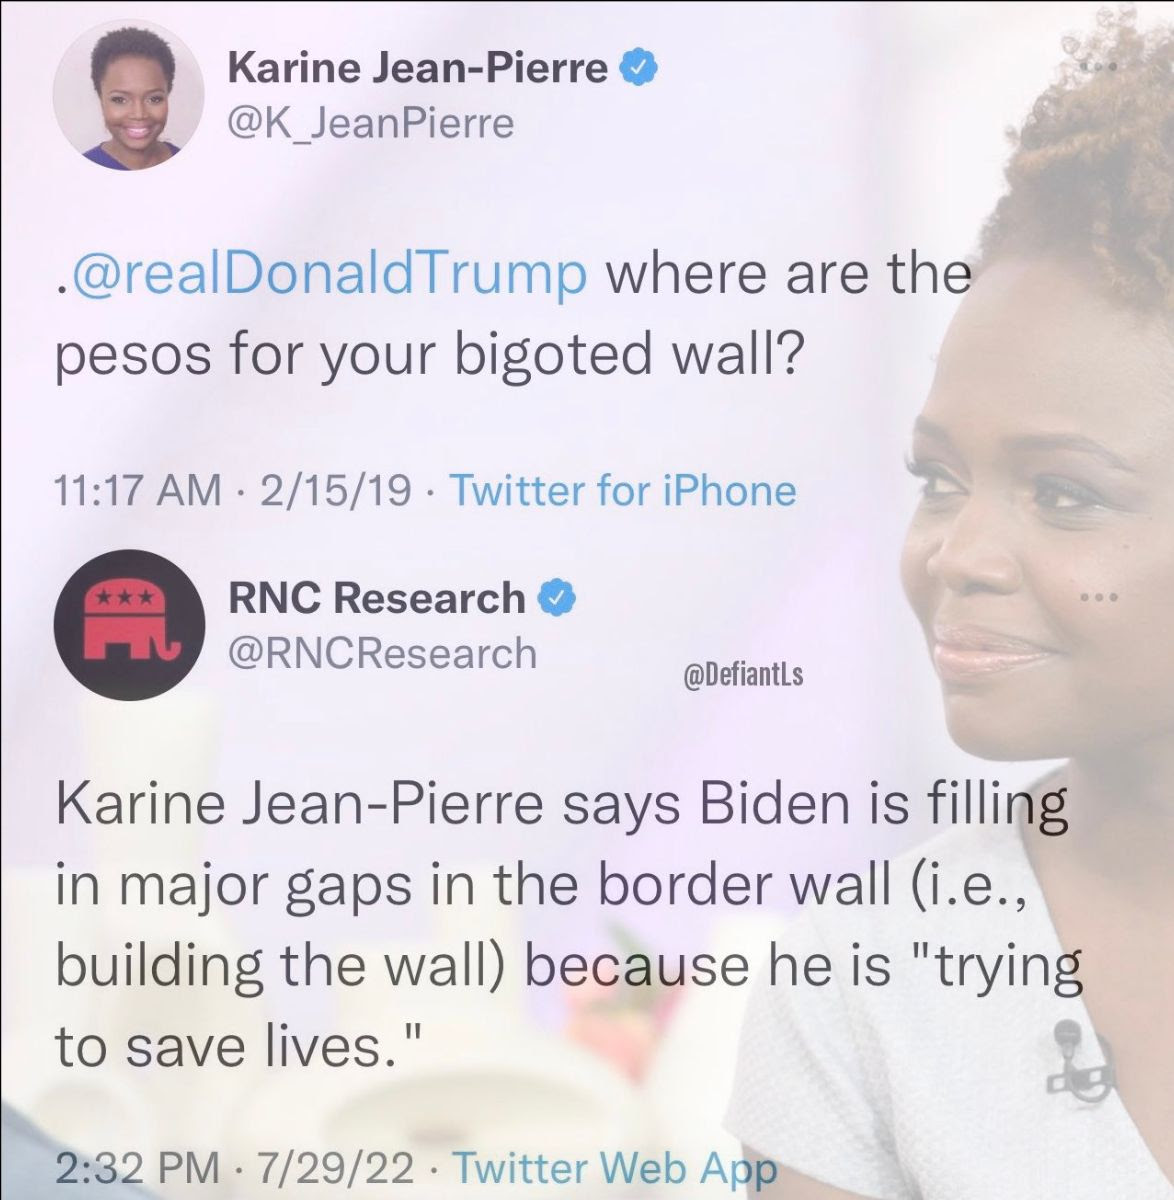 Hypocrite: Karene Jean-Pierre. Calls out Trump for wall then praises Biden for wall.